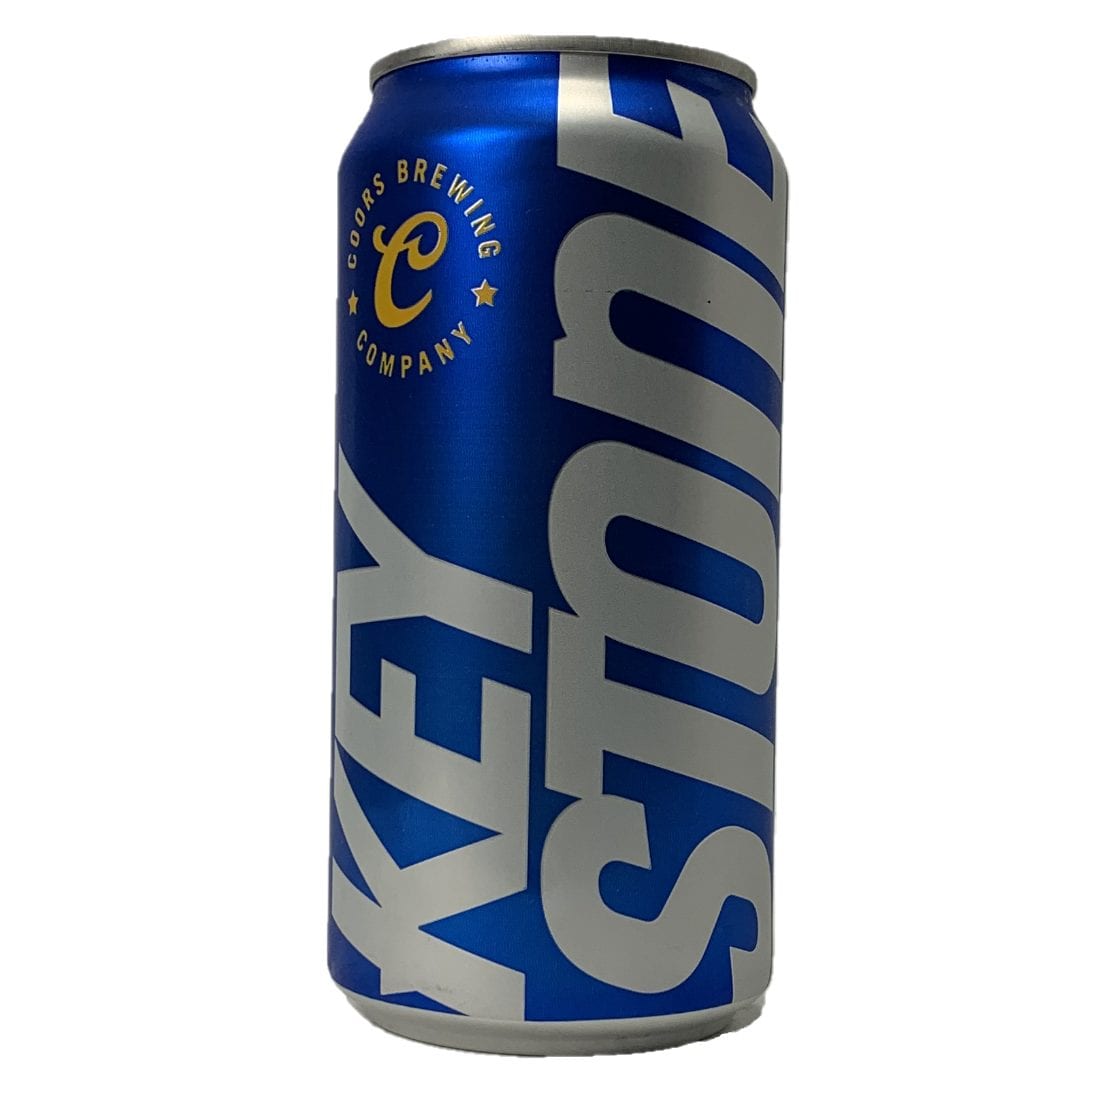 vækst ting nul Keystone Light – 30 Pack of Cans | Colonial Spirits